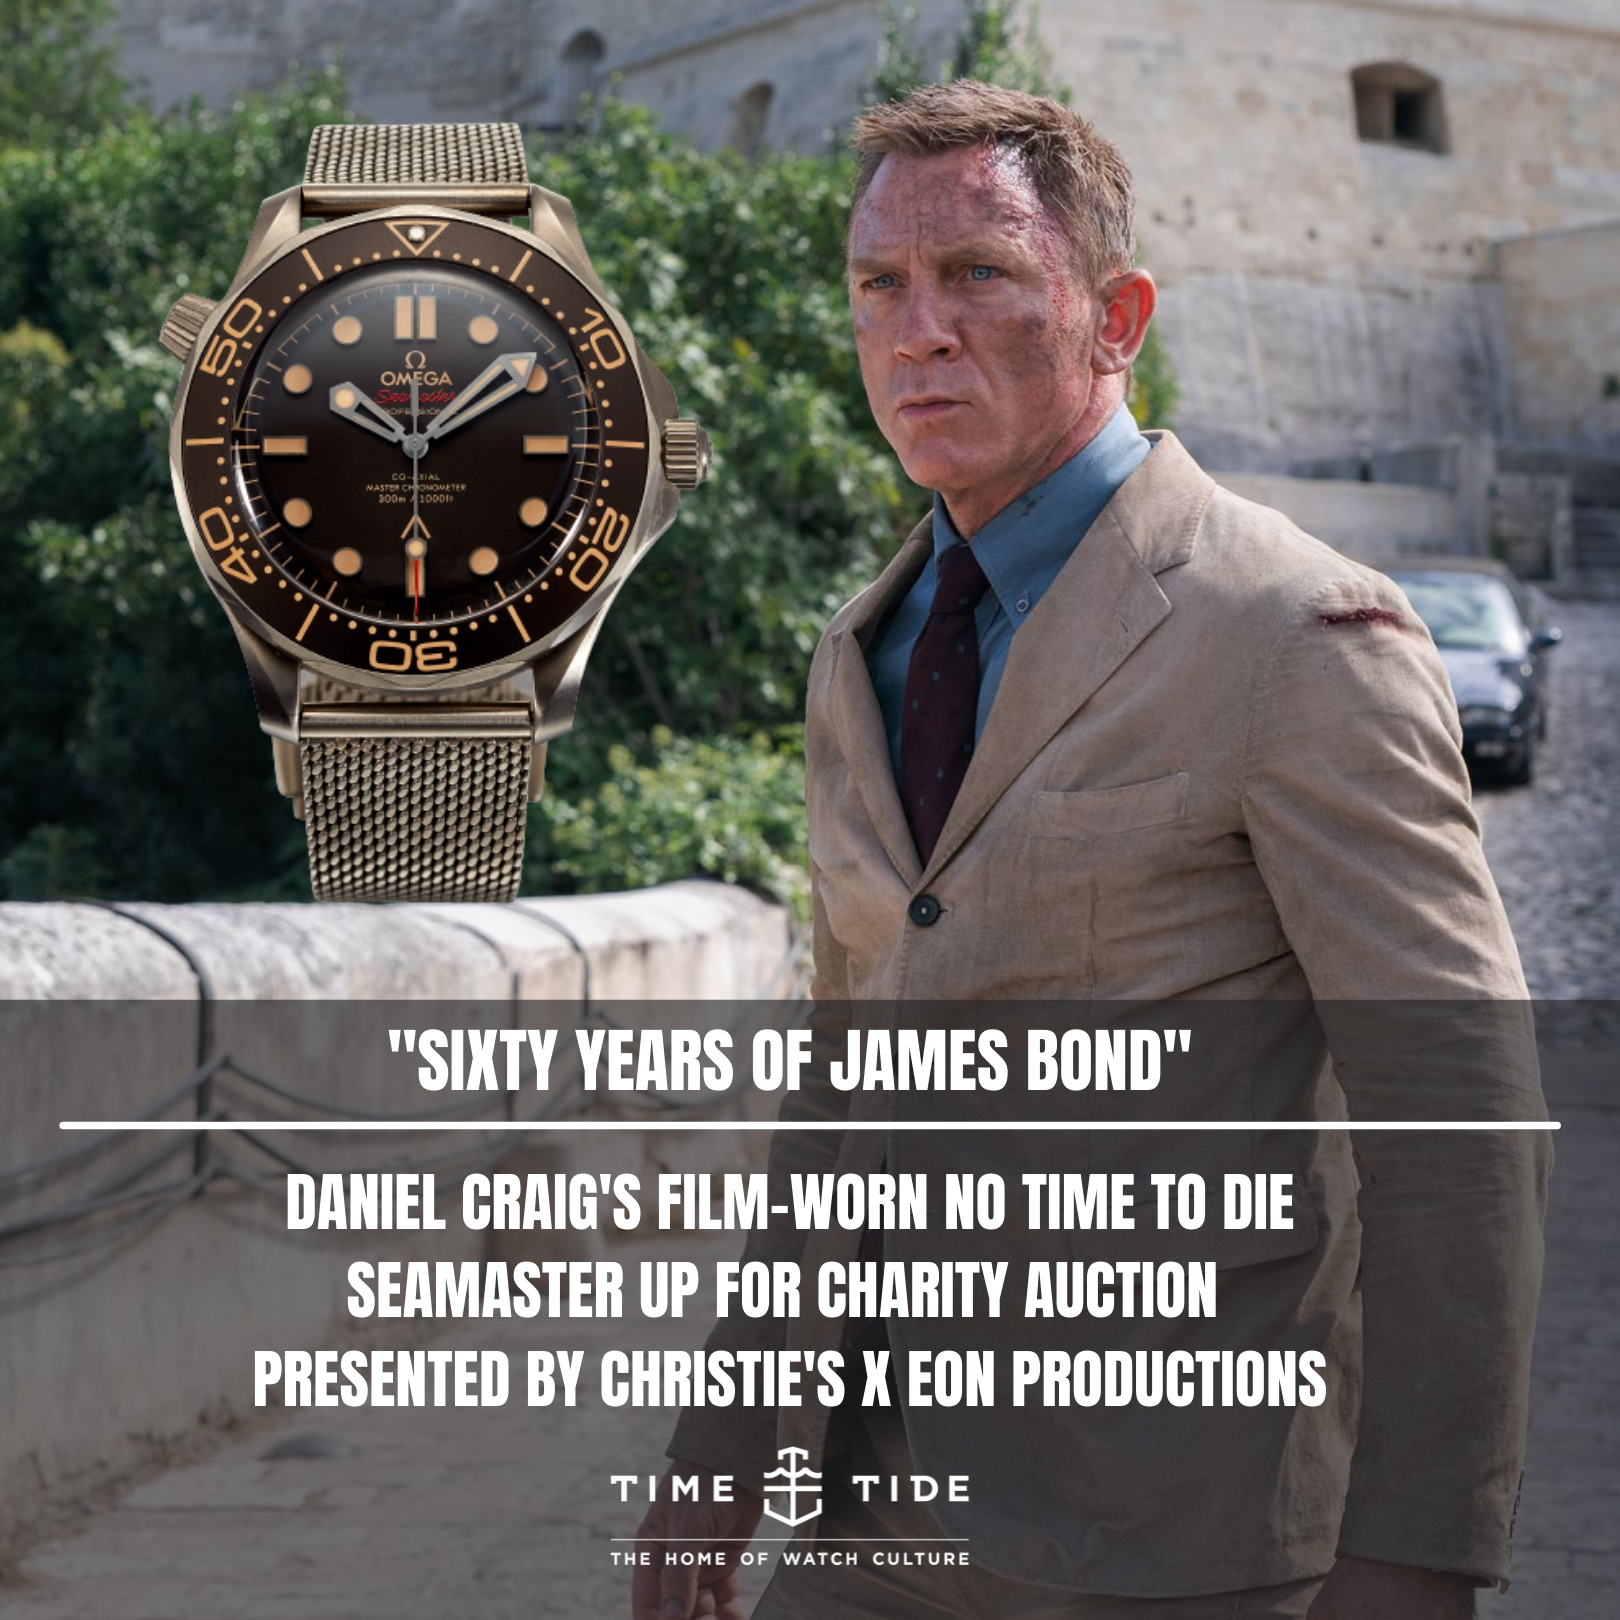 Daniel Craig's Seamaster from No Time to Die to be auctioned for charity